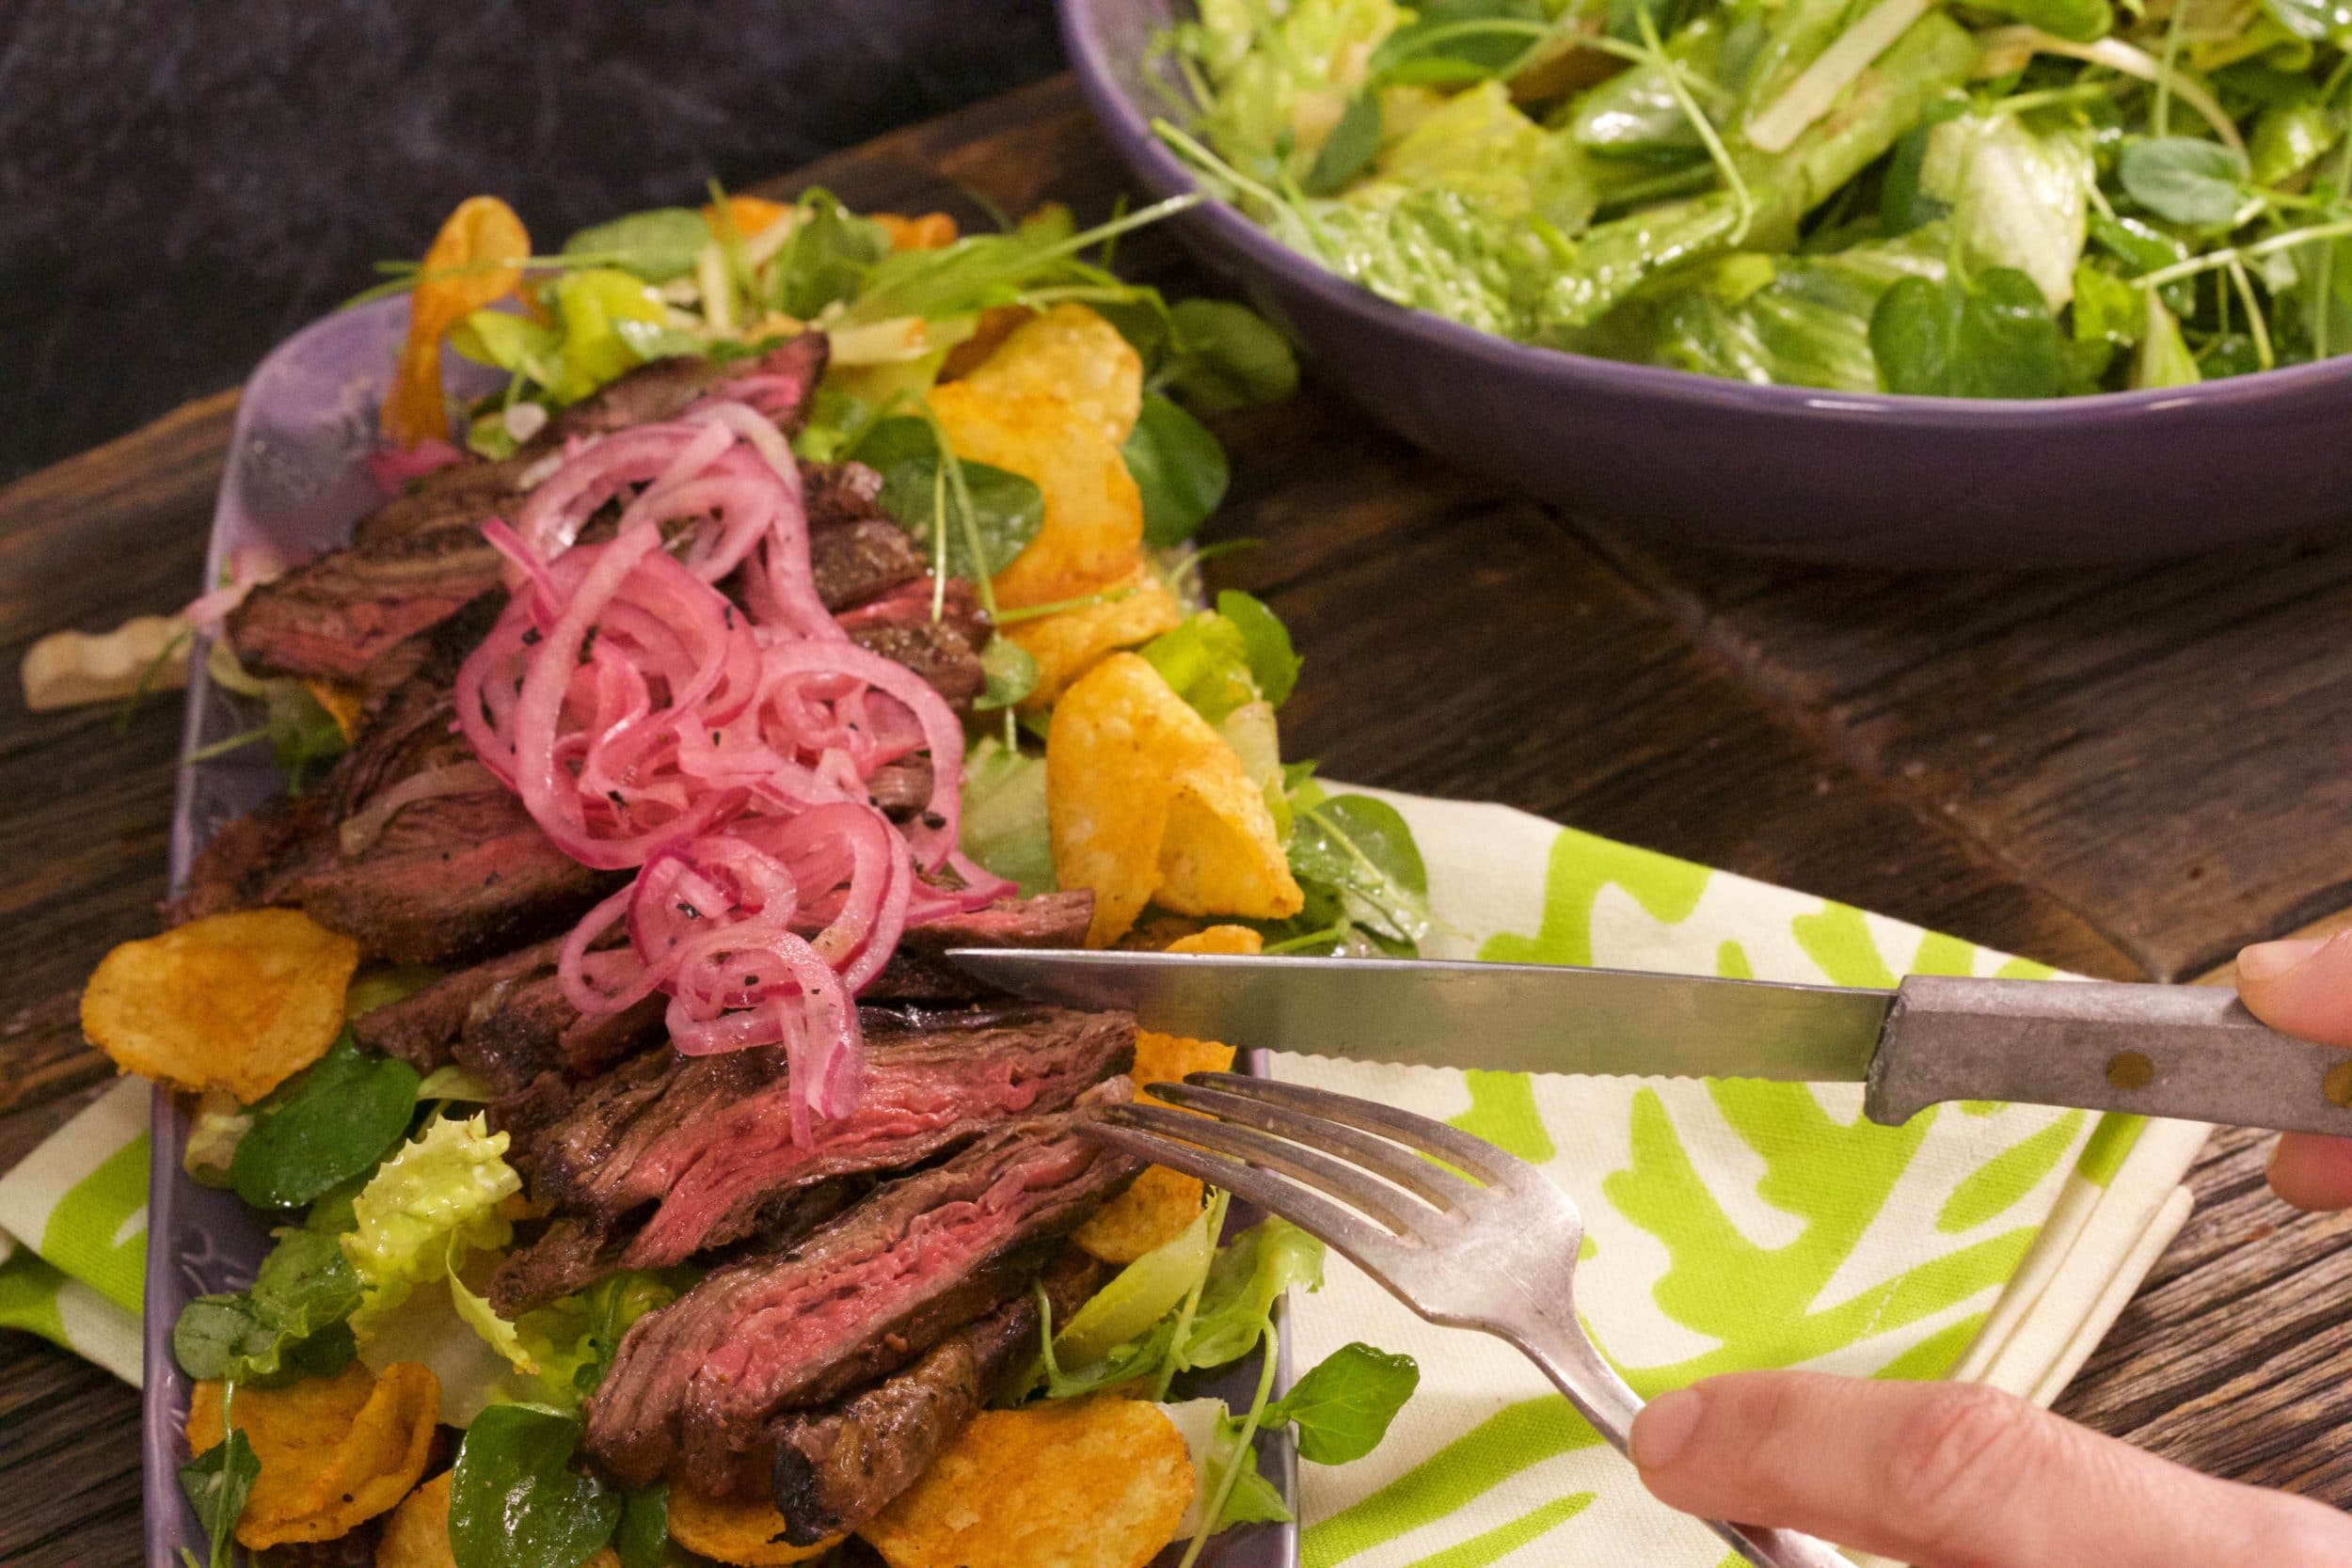 Sliced Steak Salad with Chipotle Vinaigrette and BBQ Chips